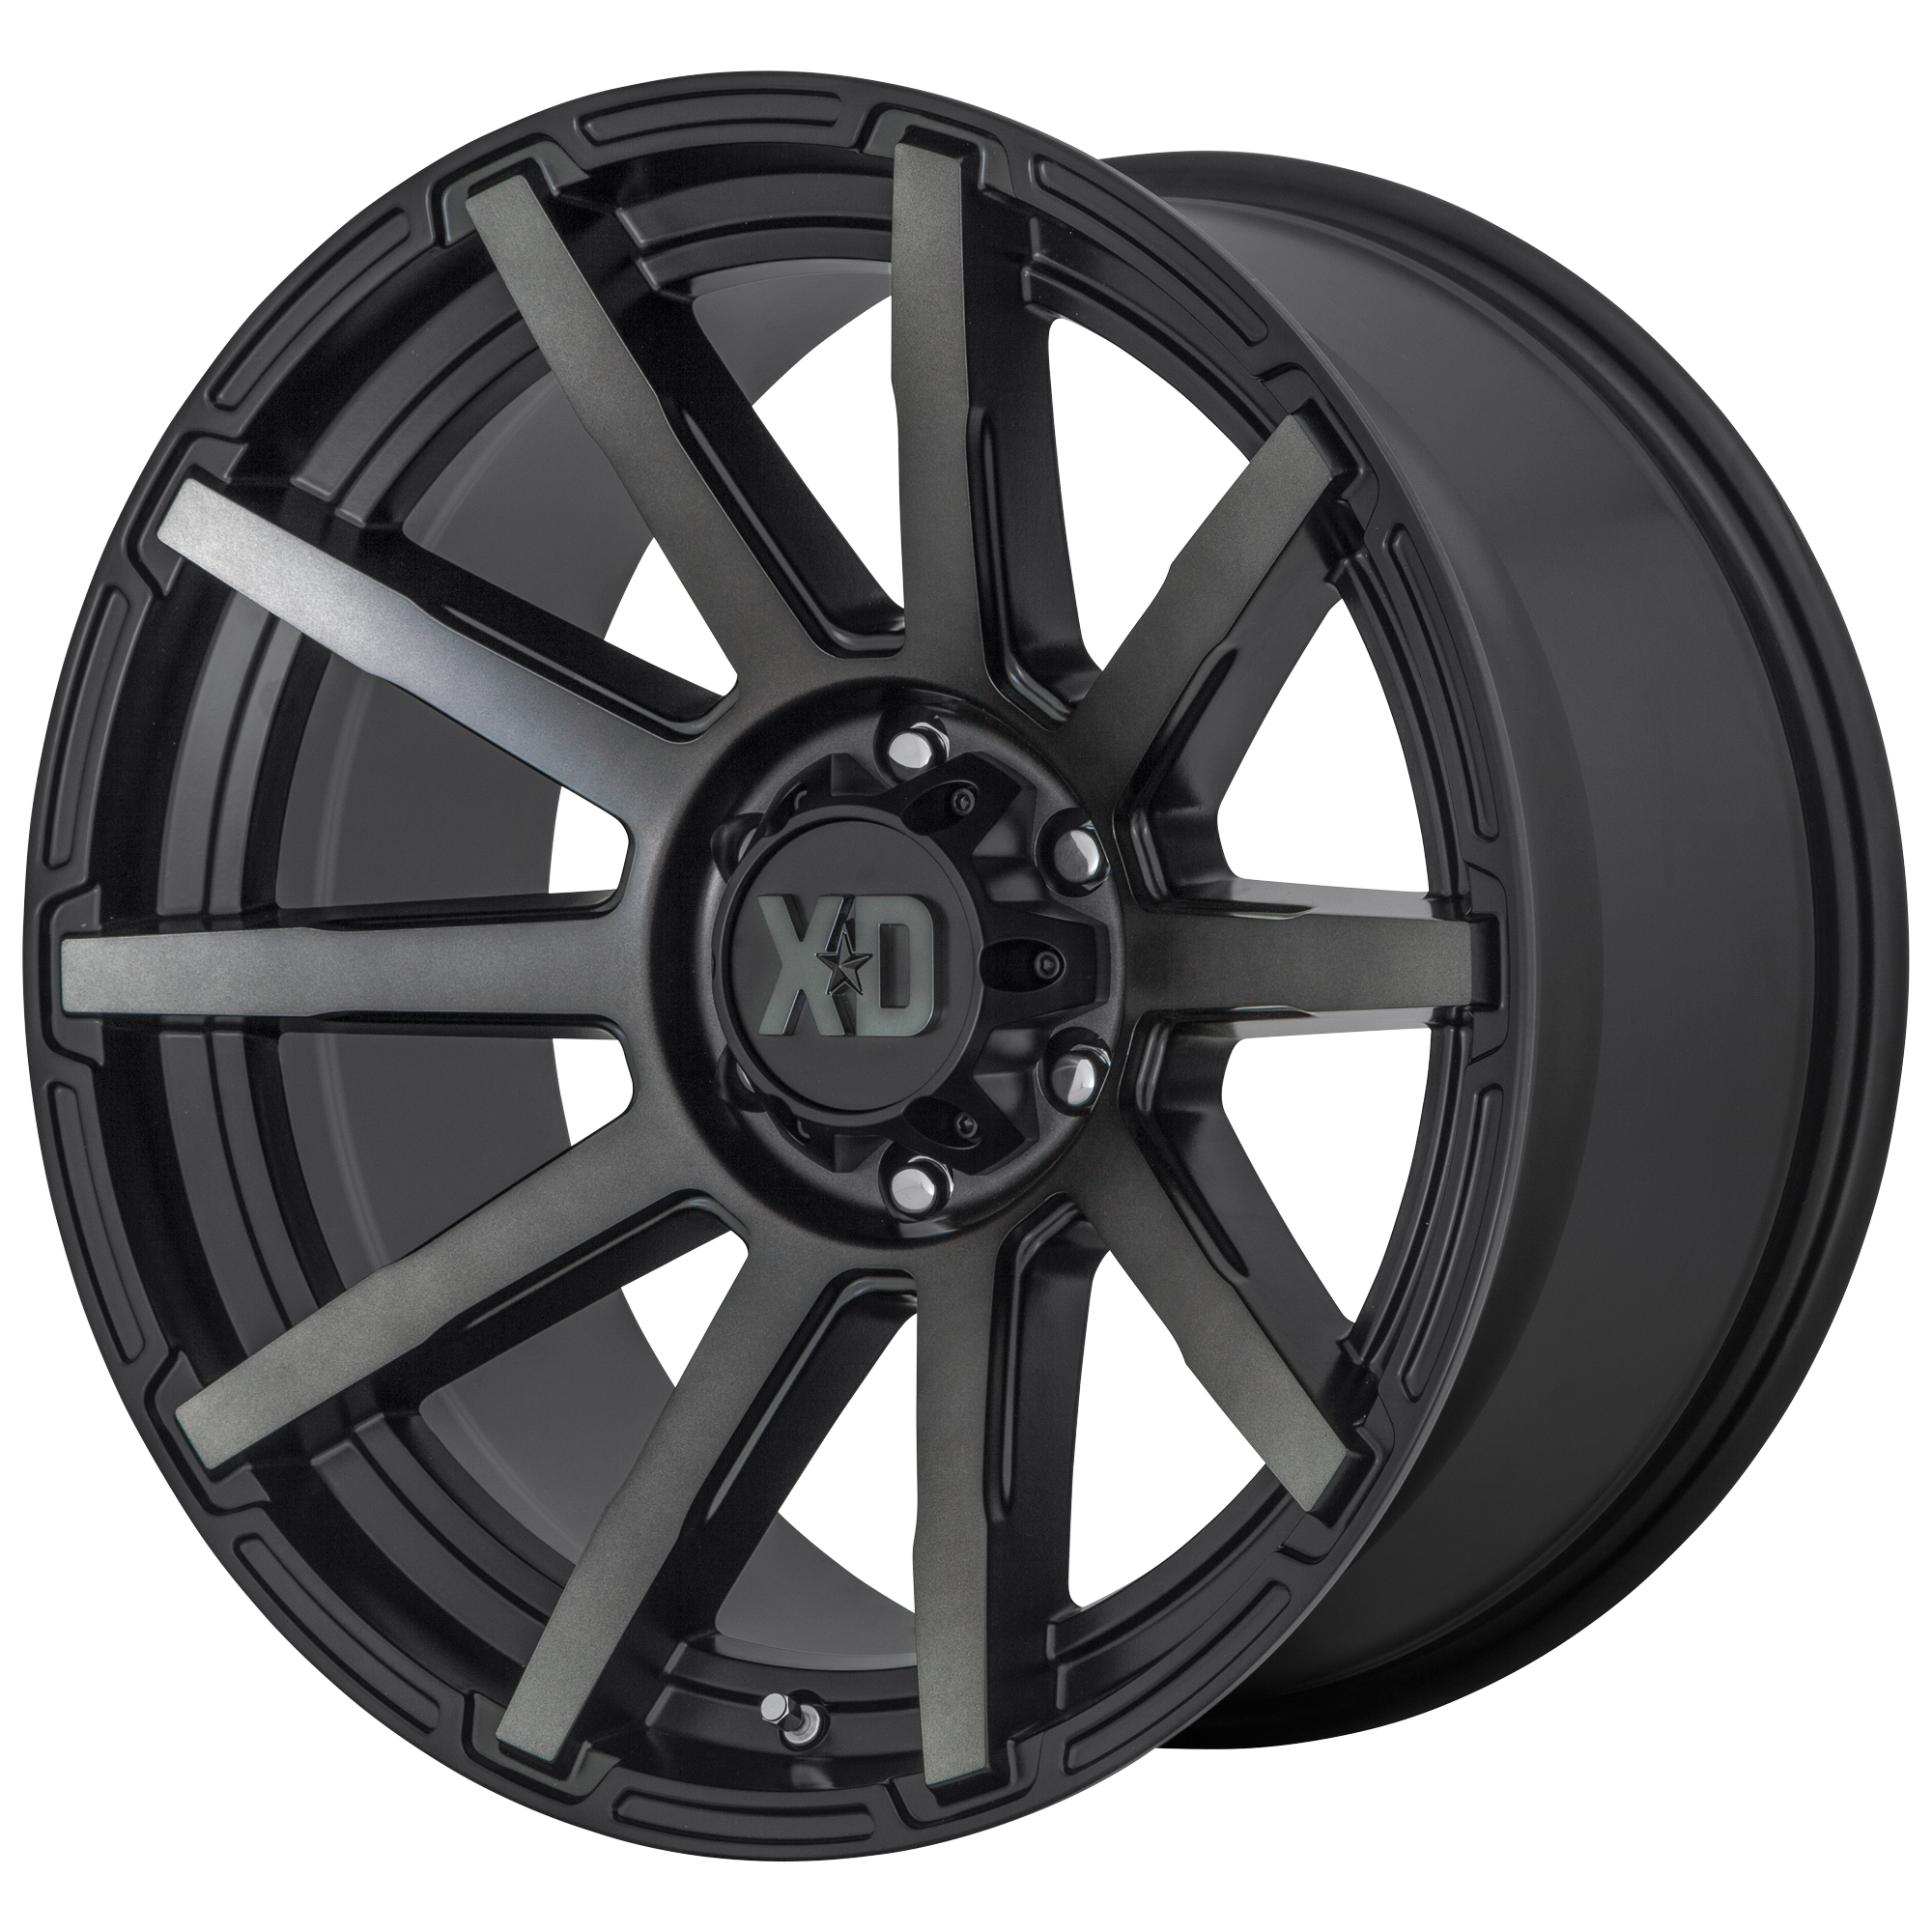 OUTBREAK 18x9 6x120.00 SATIN BLACK W/ GRAY TINT (0 mm) - Tires and Engine Performance